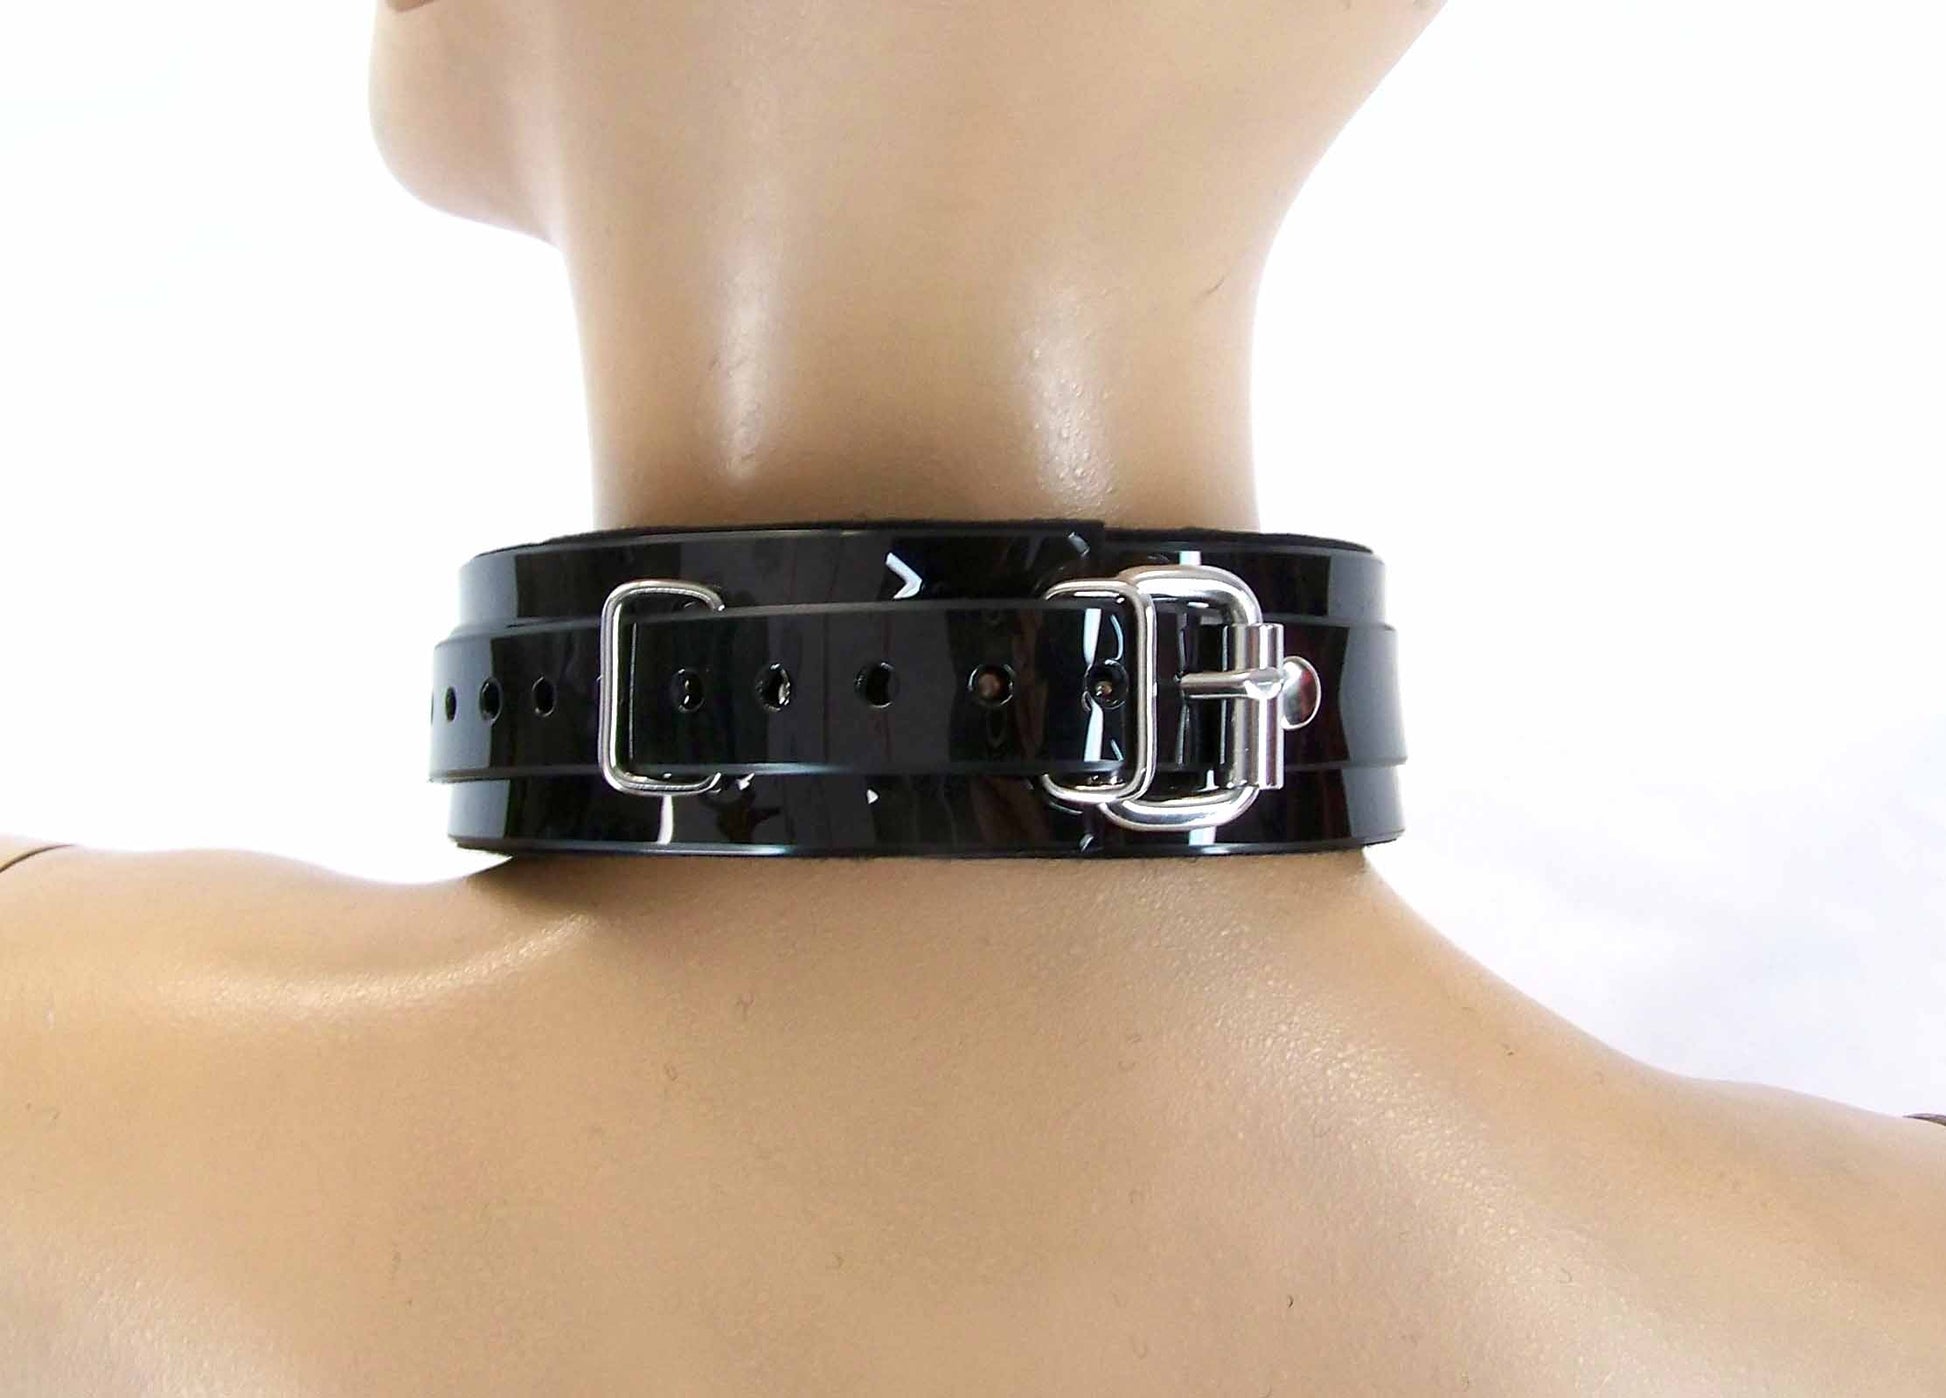 The back view of the PVC Neoprene-lined collar.